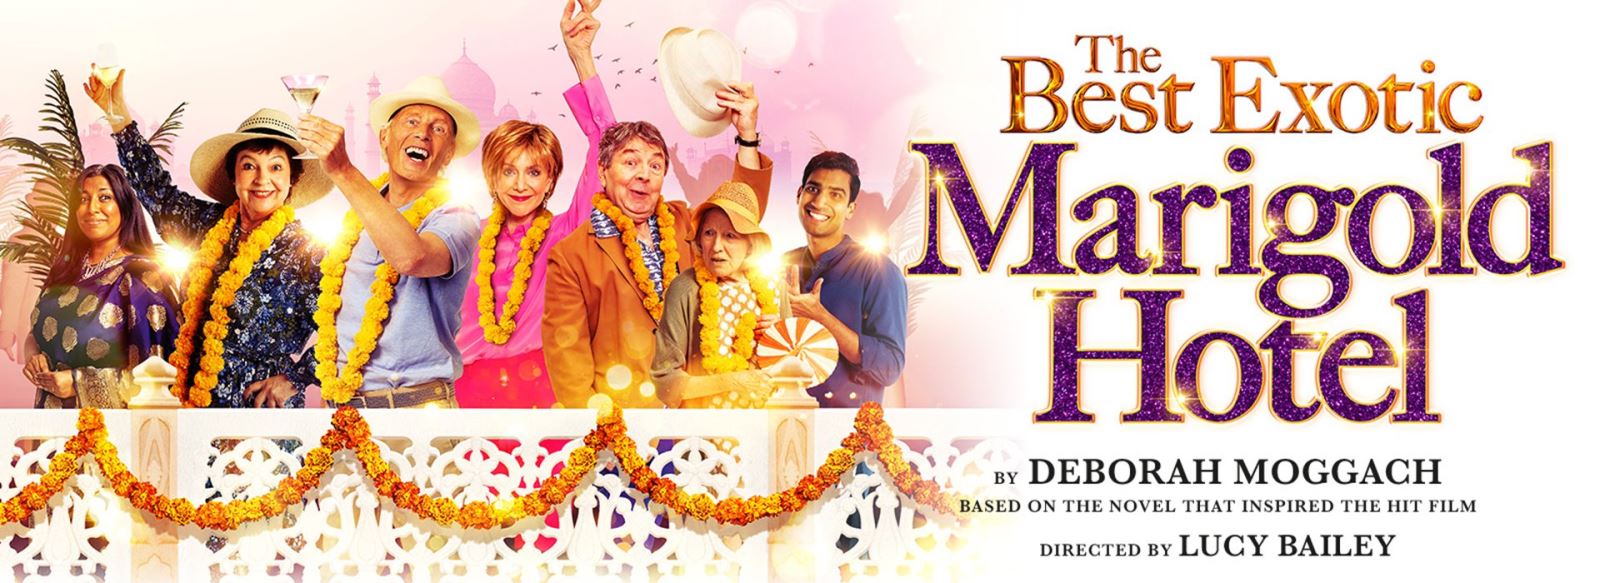 The Best Exotic Marigold Hotel theatre banner